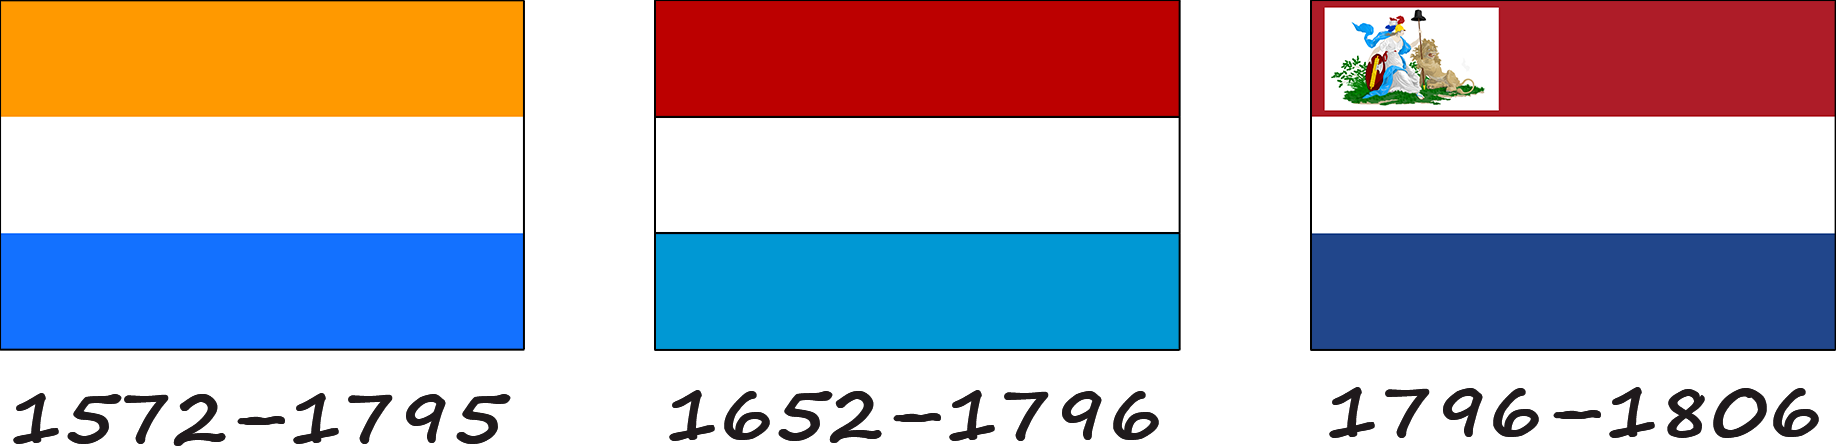 History of the Dutch flag